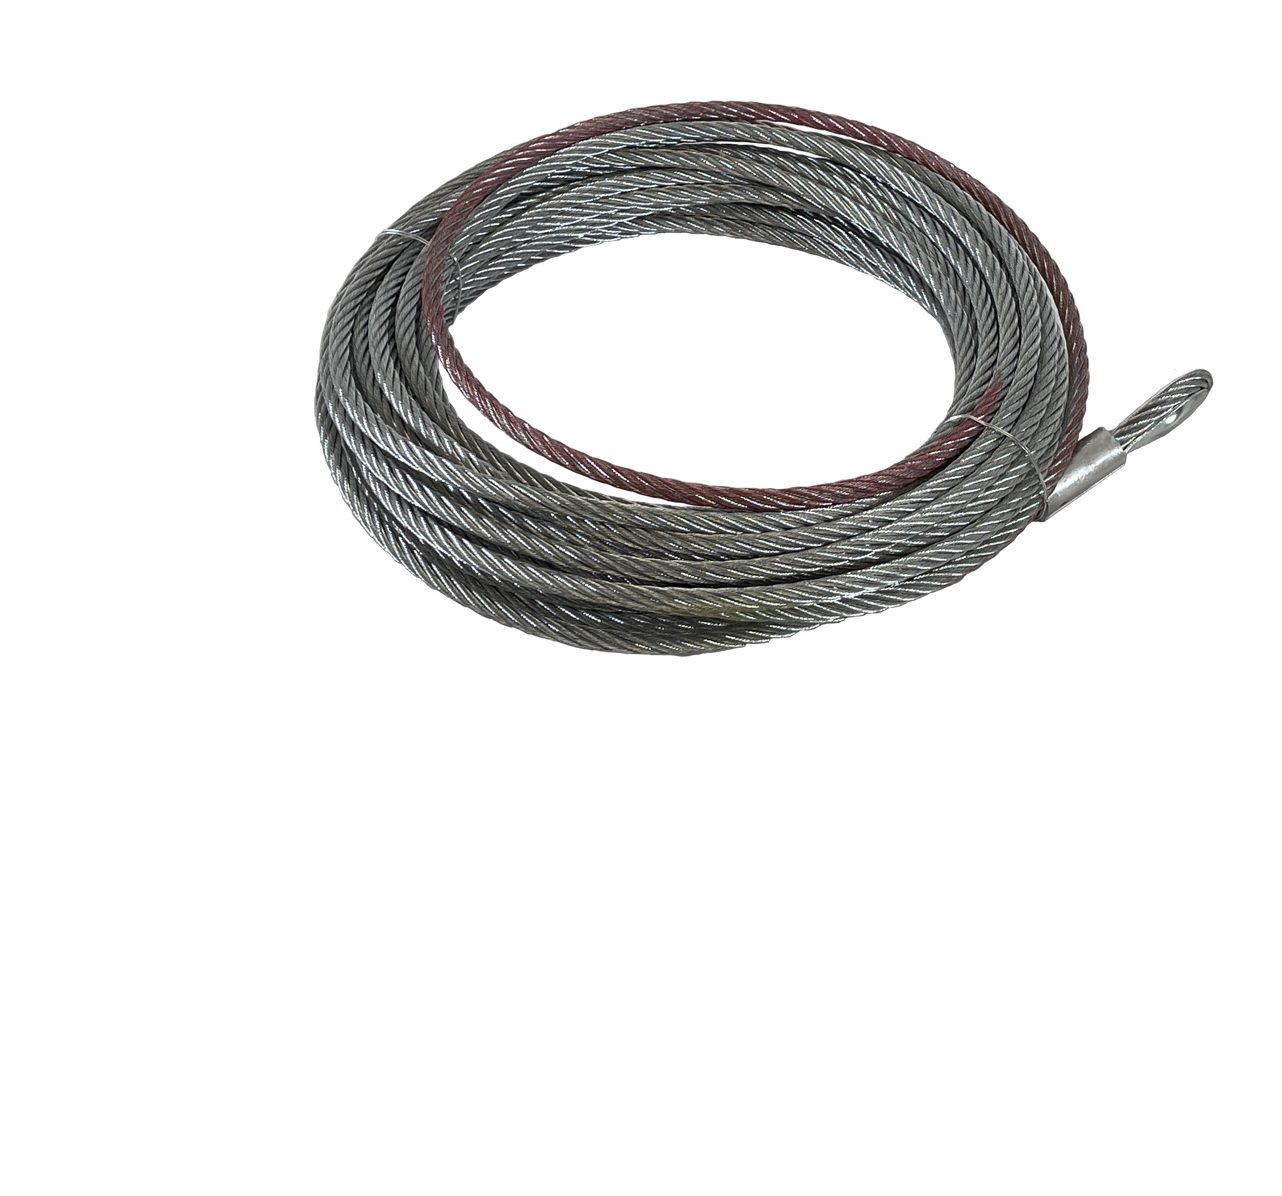 https://www.reaperattachments.com/wp-content/uploads/2023/03/EX-FRW-100-Steel-Cable-e1678493530687.jpg